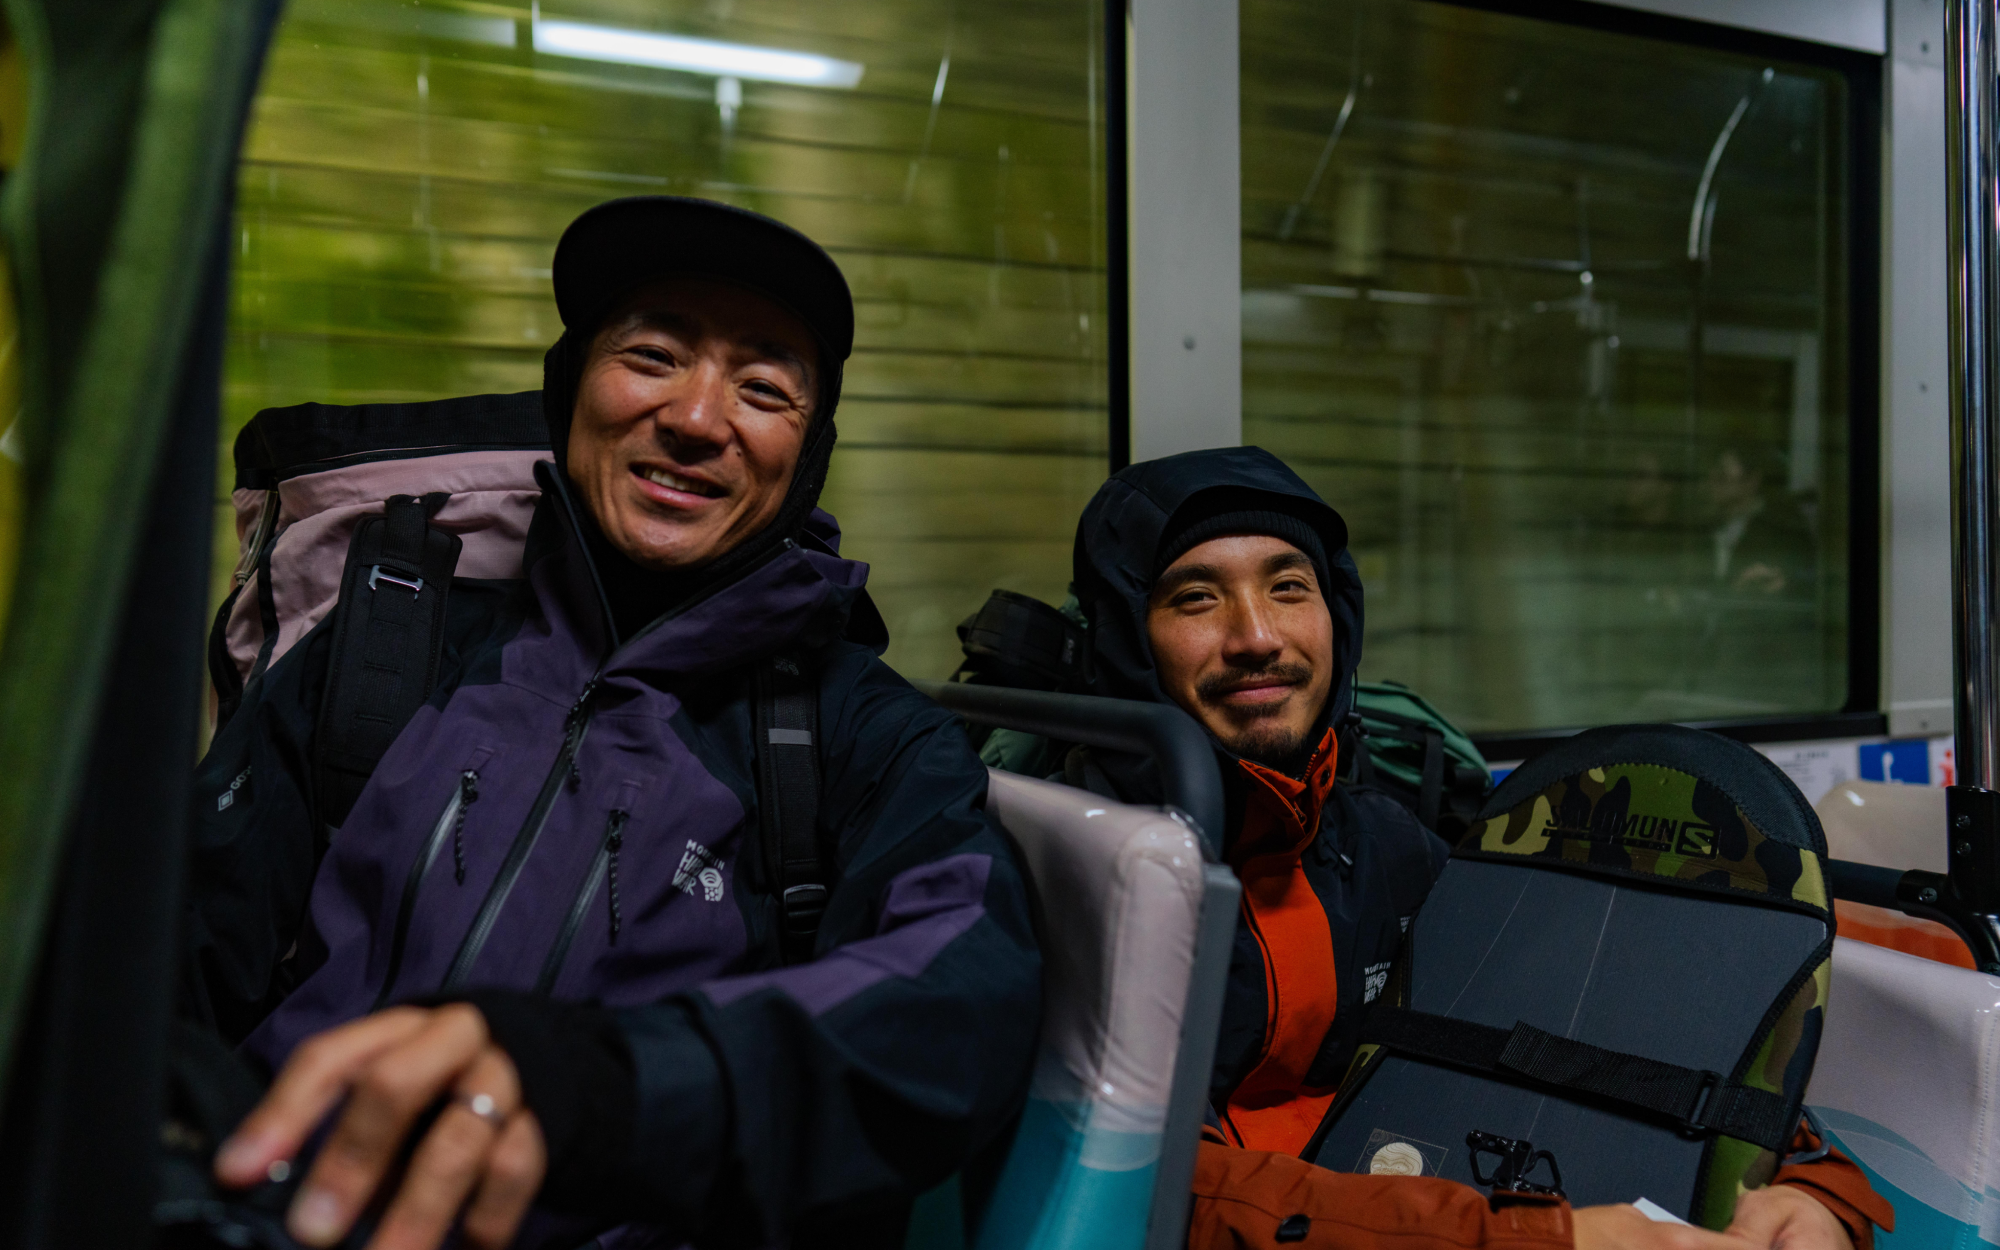 Keisuke and Daisuke riding the subway in Japan, decked out in their Mountain Hardwear ski kits.